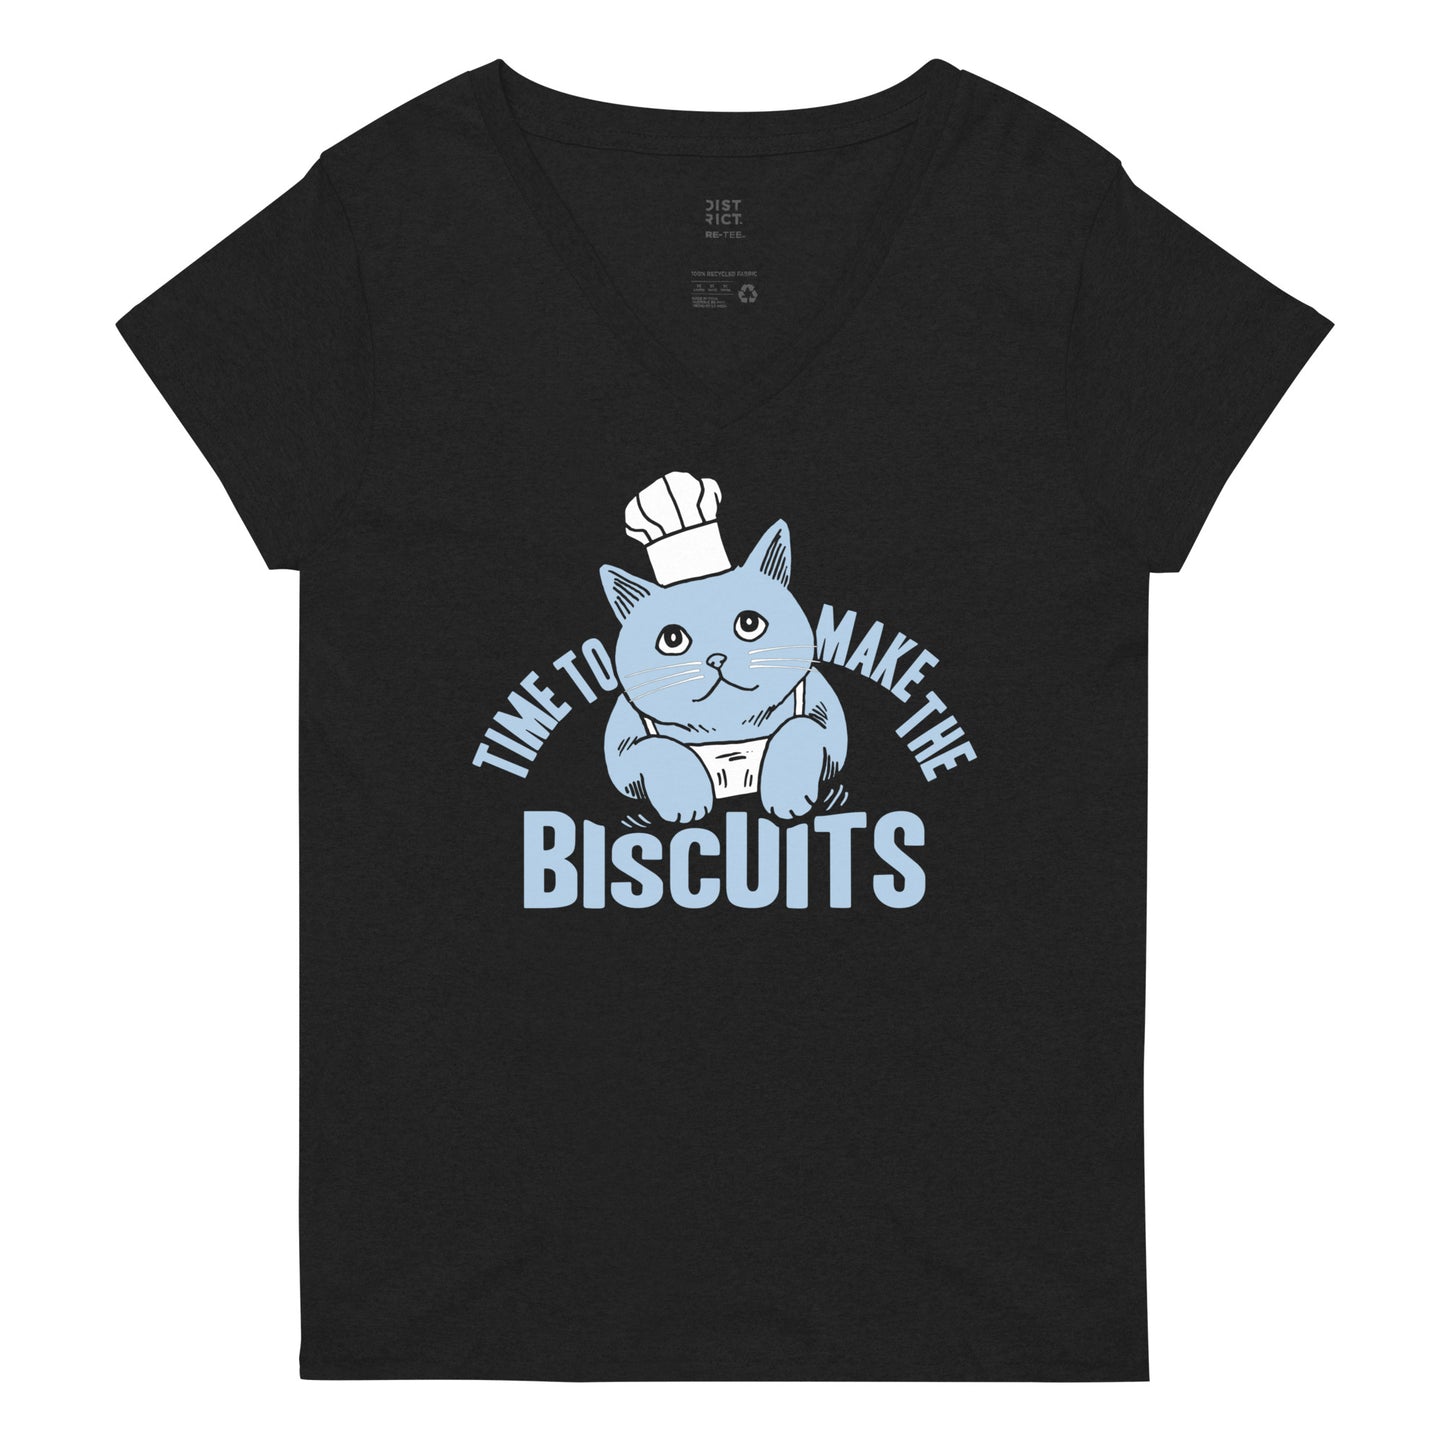 Time To Make The Biscuits Women's V-Neck Tee